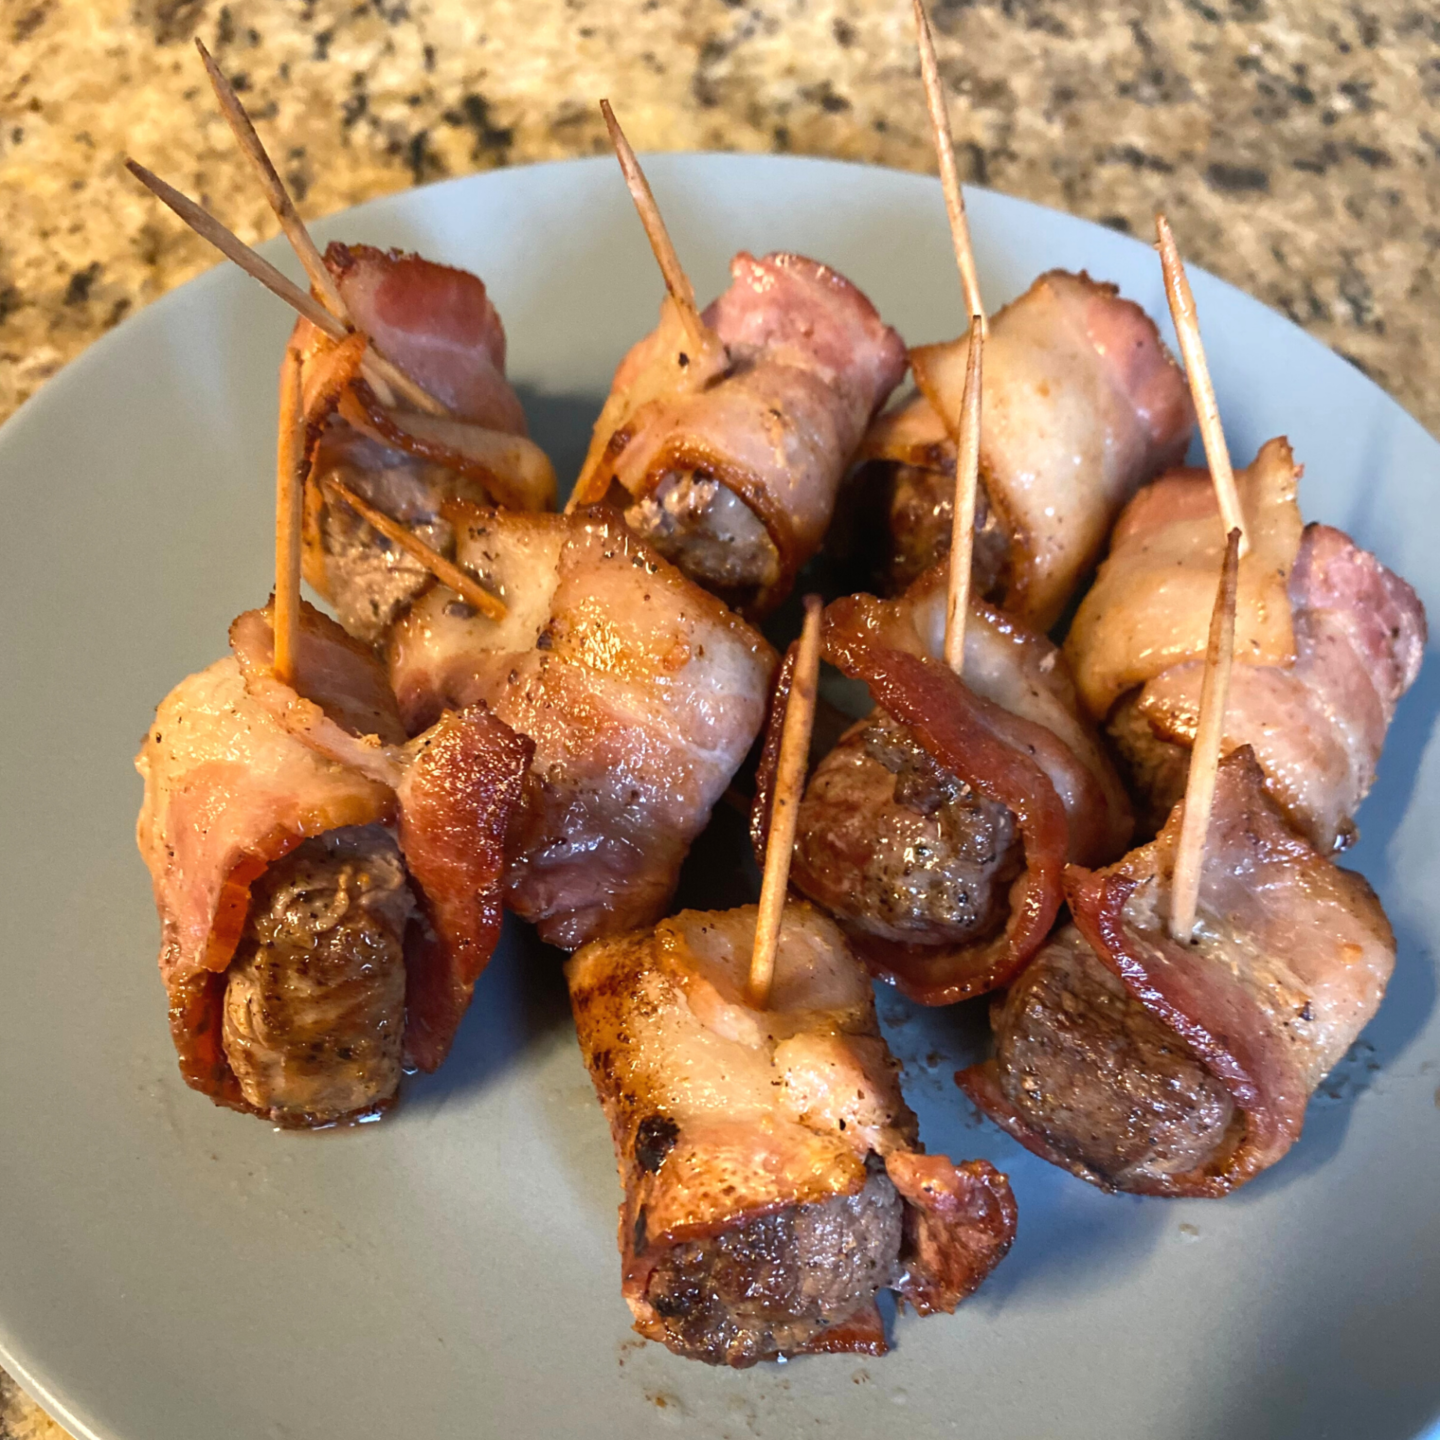 bacon-wrapped-steak-bites-on-plate-1